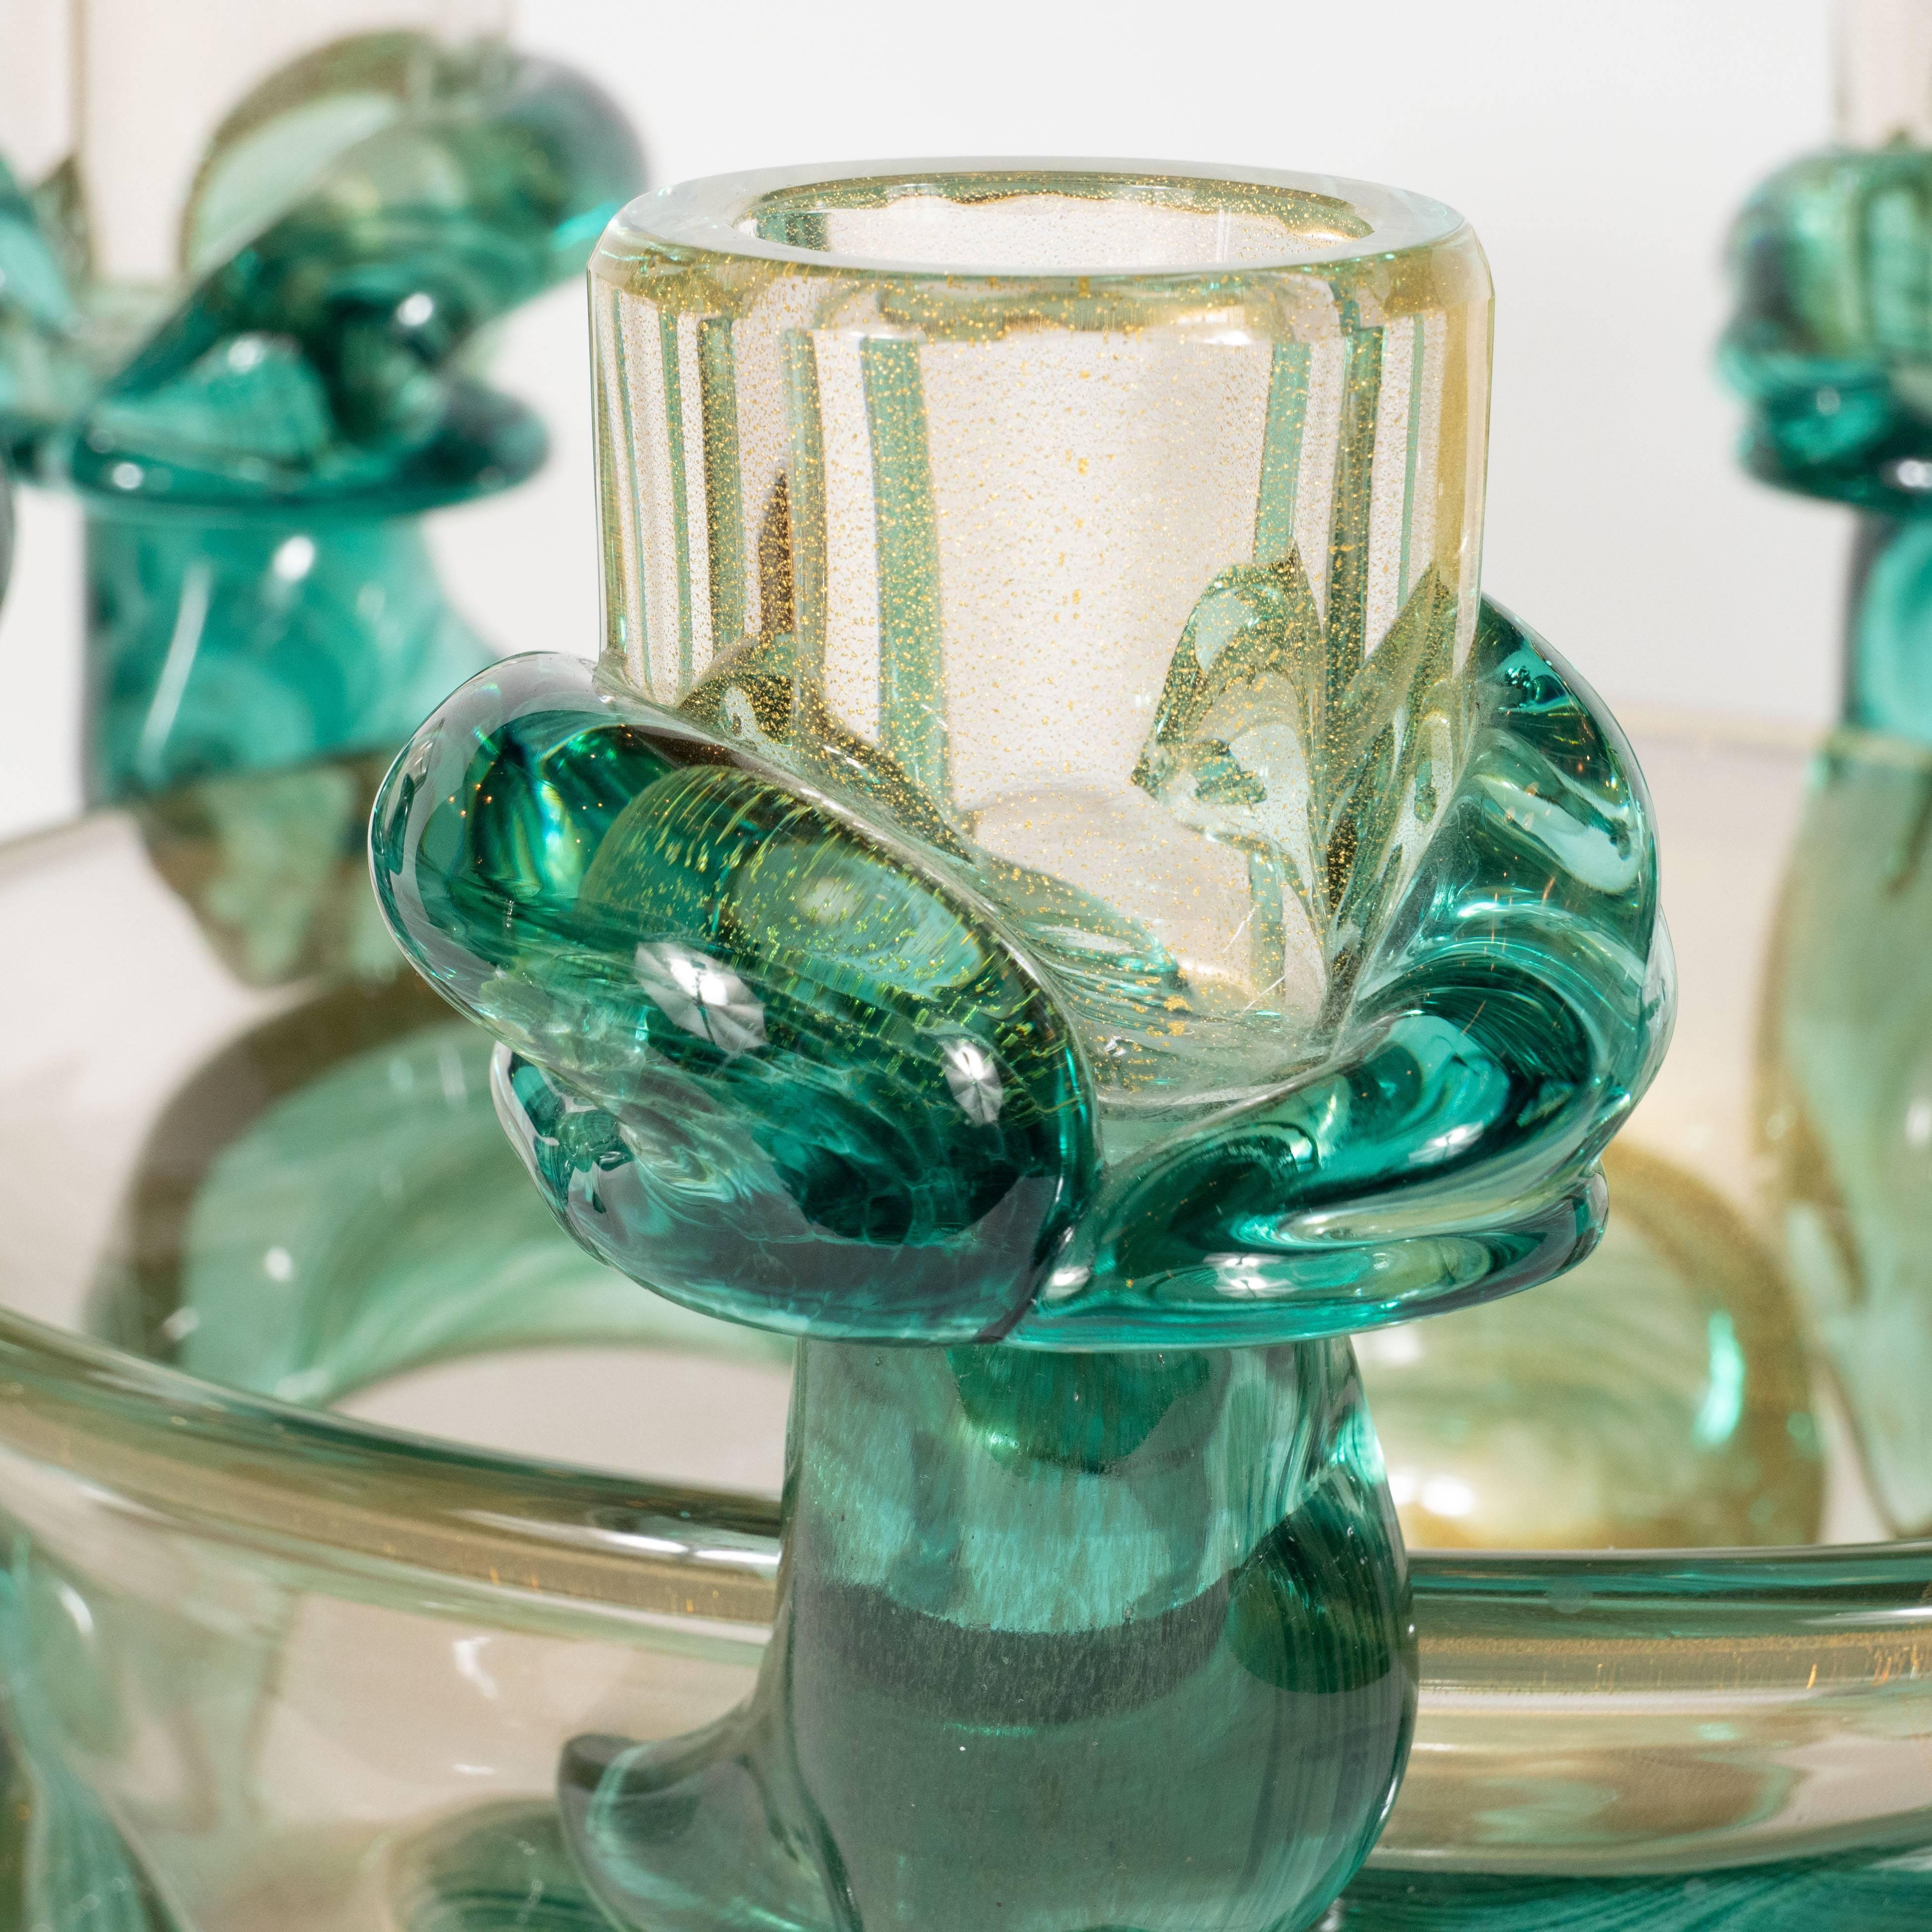 This stunning Mid-Century Modern sculptural handblown glass centerpiece bowl was realized in Murano, Italy- the islands off the coast of Venice- by the esteemed maker Seguso, circa 1960. The center bowl and candleholders are composed of translucent